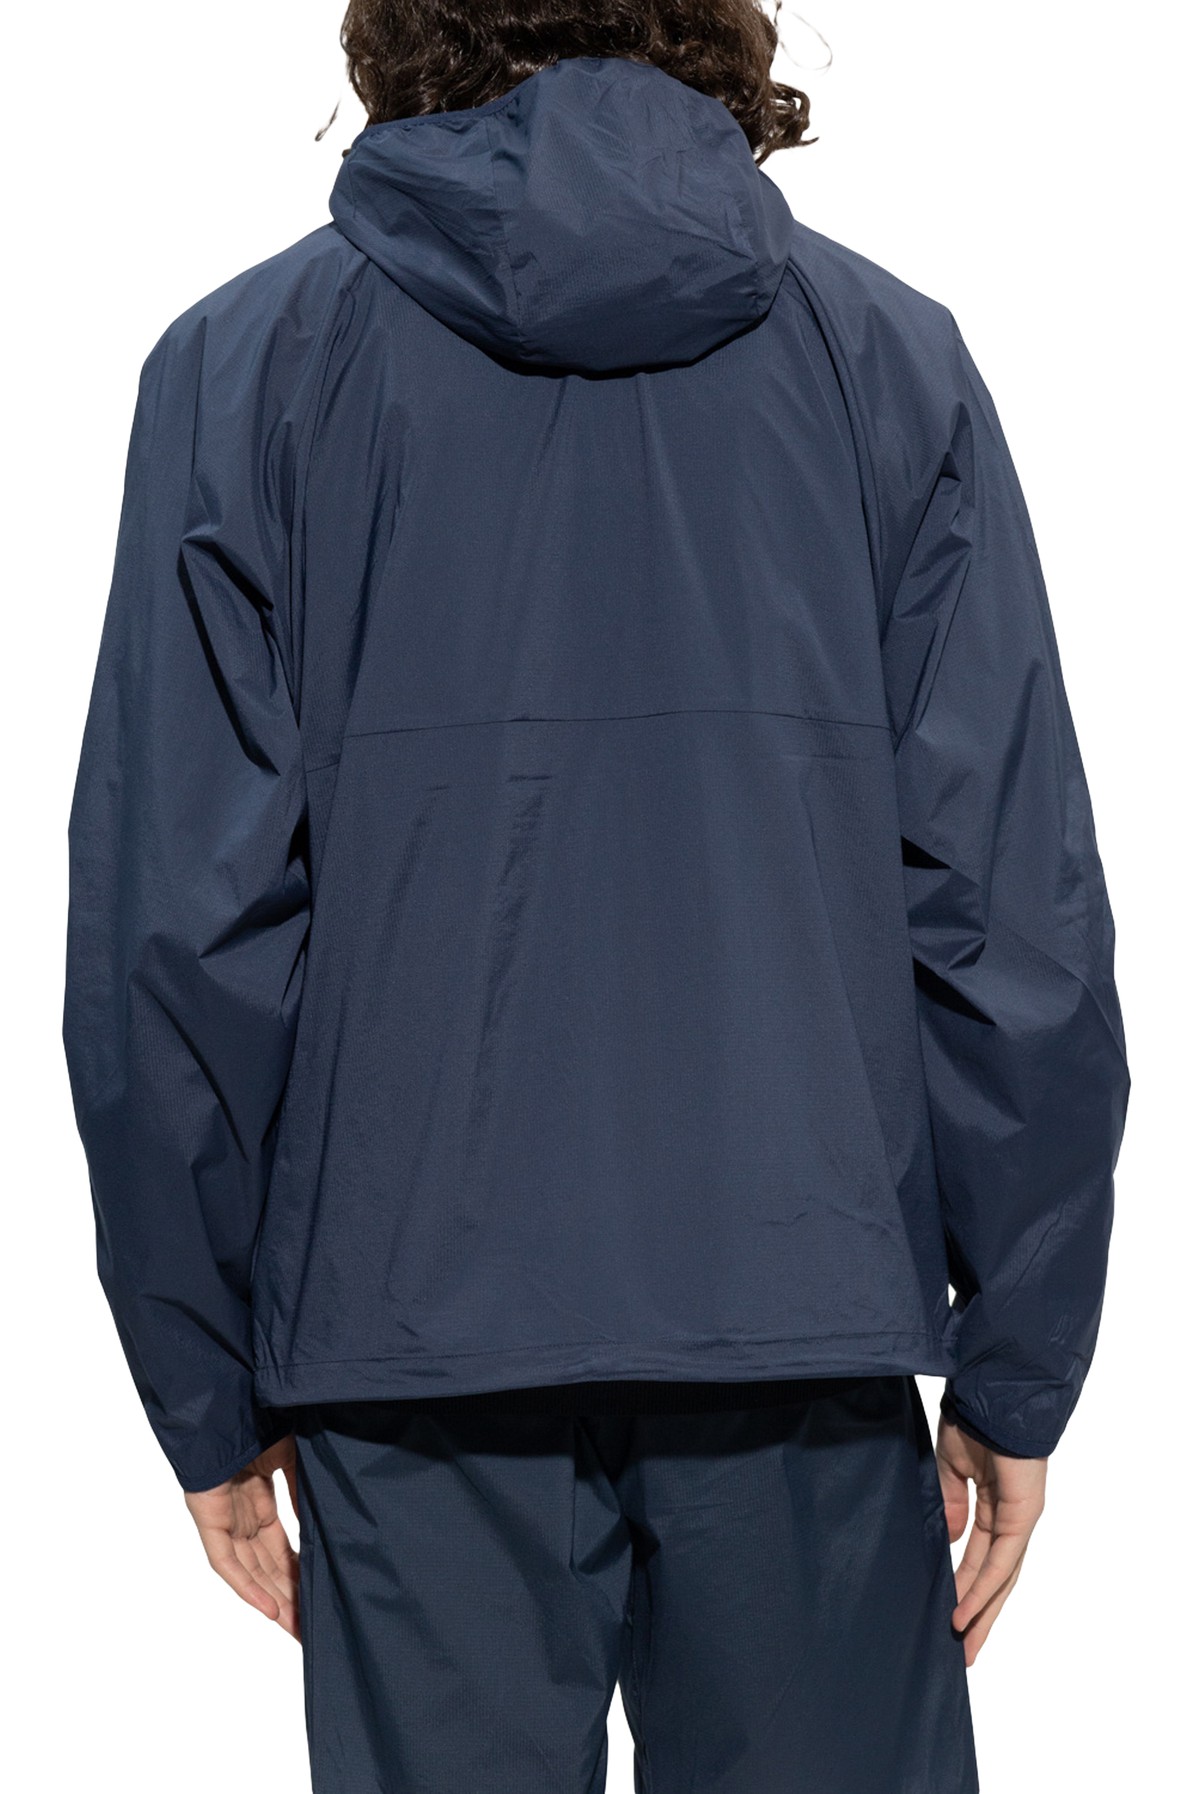 Norse Projects ‘Herluf' light jacket